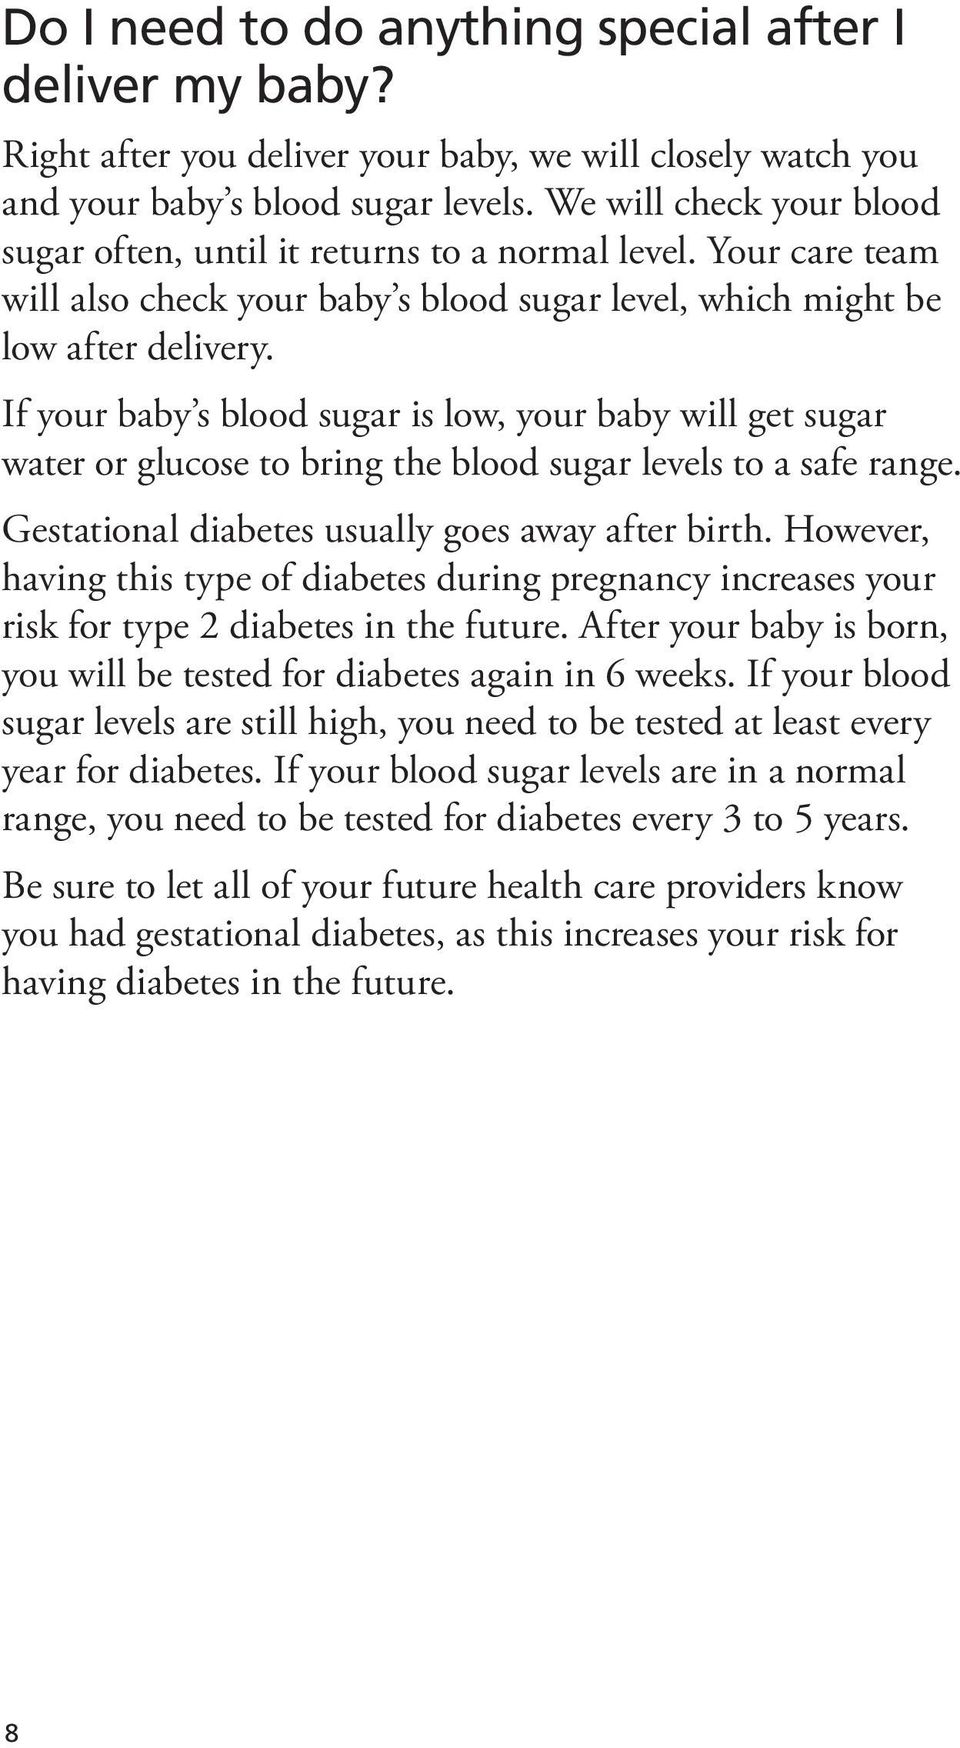 If your baby s blood sugar is low, your baby will get sugar water or glucose to bring the blood sugar levels to a safe range. Gestational diabetes usually goes away after birth.